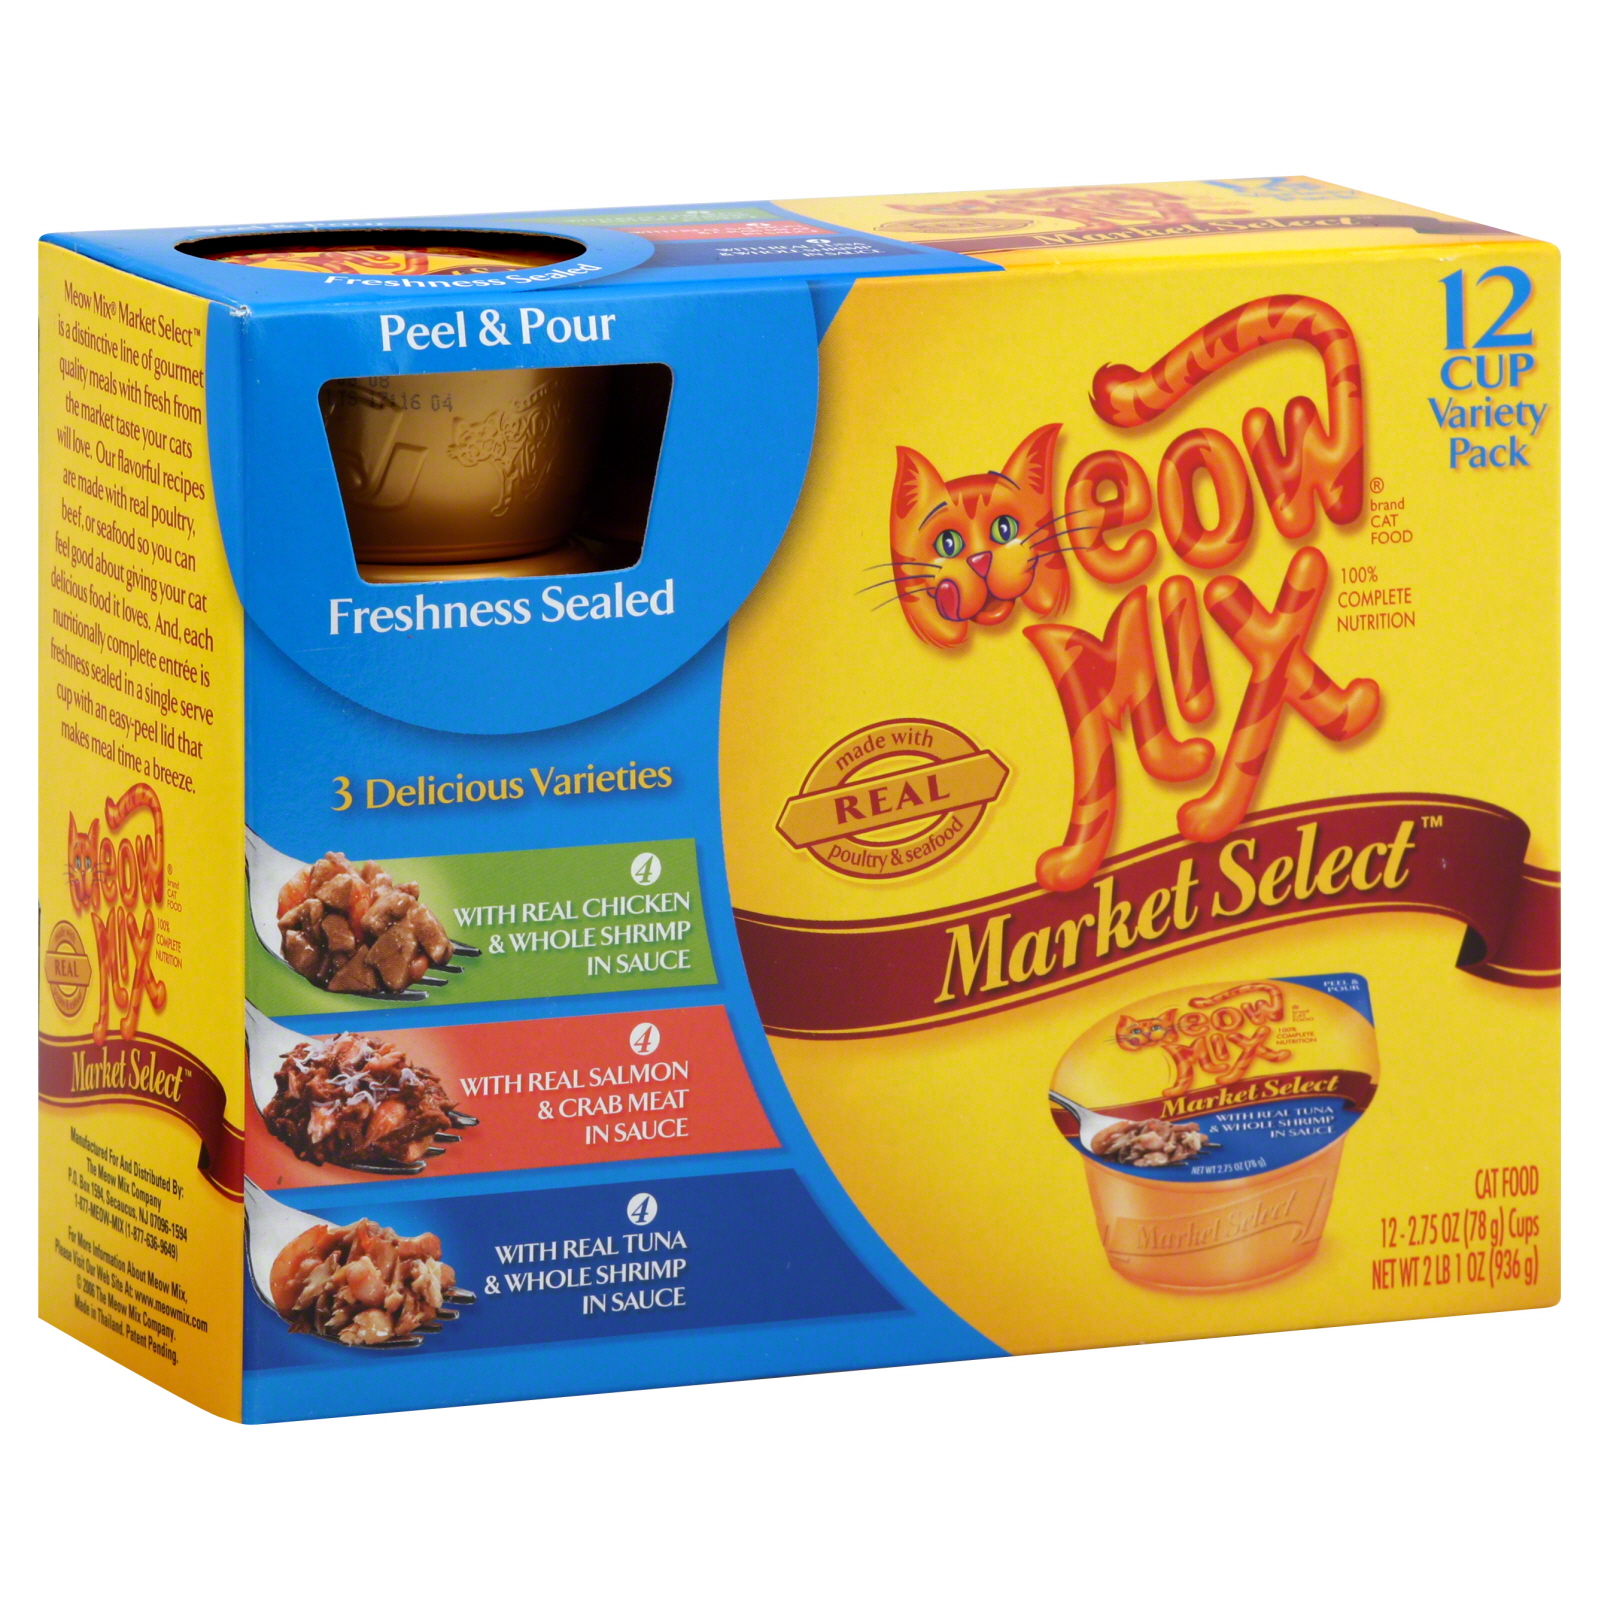 Meow Mix Market Select Cat Food, Variety Pack, 12 - 2.75 oz (78 g) cups [2 lb 1 oz (936 g)]